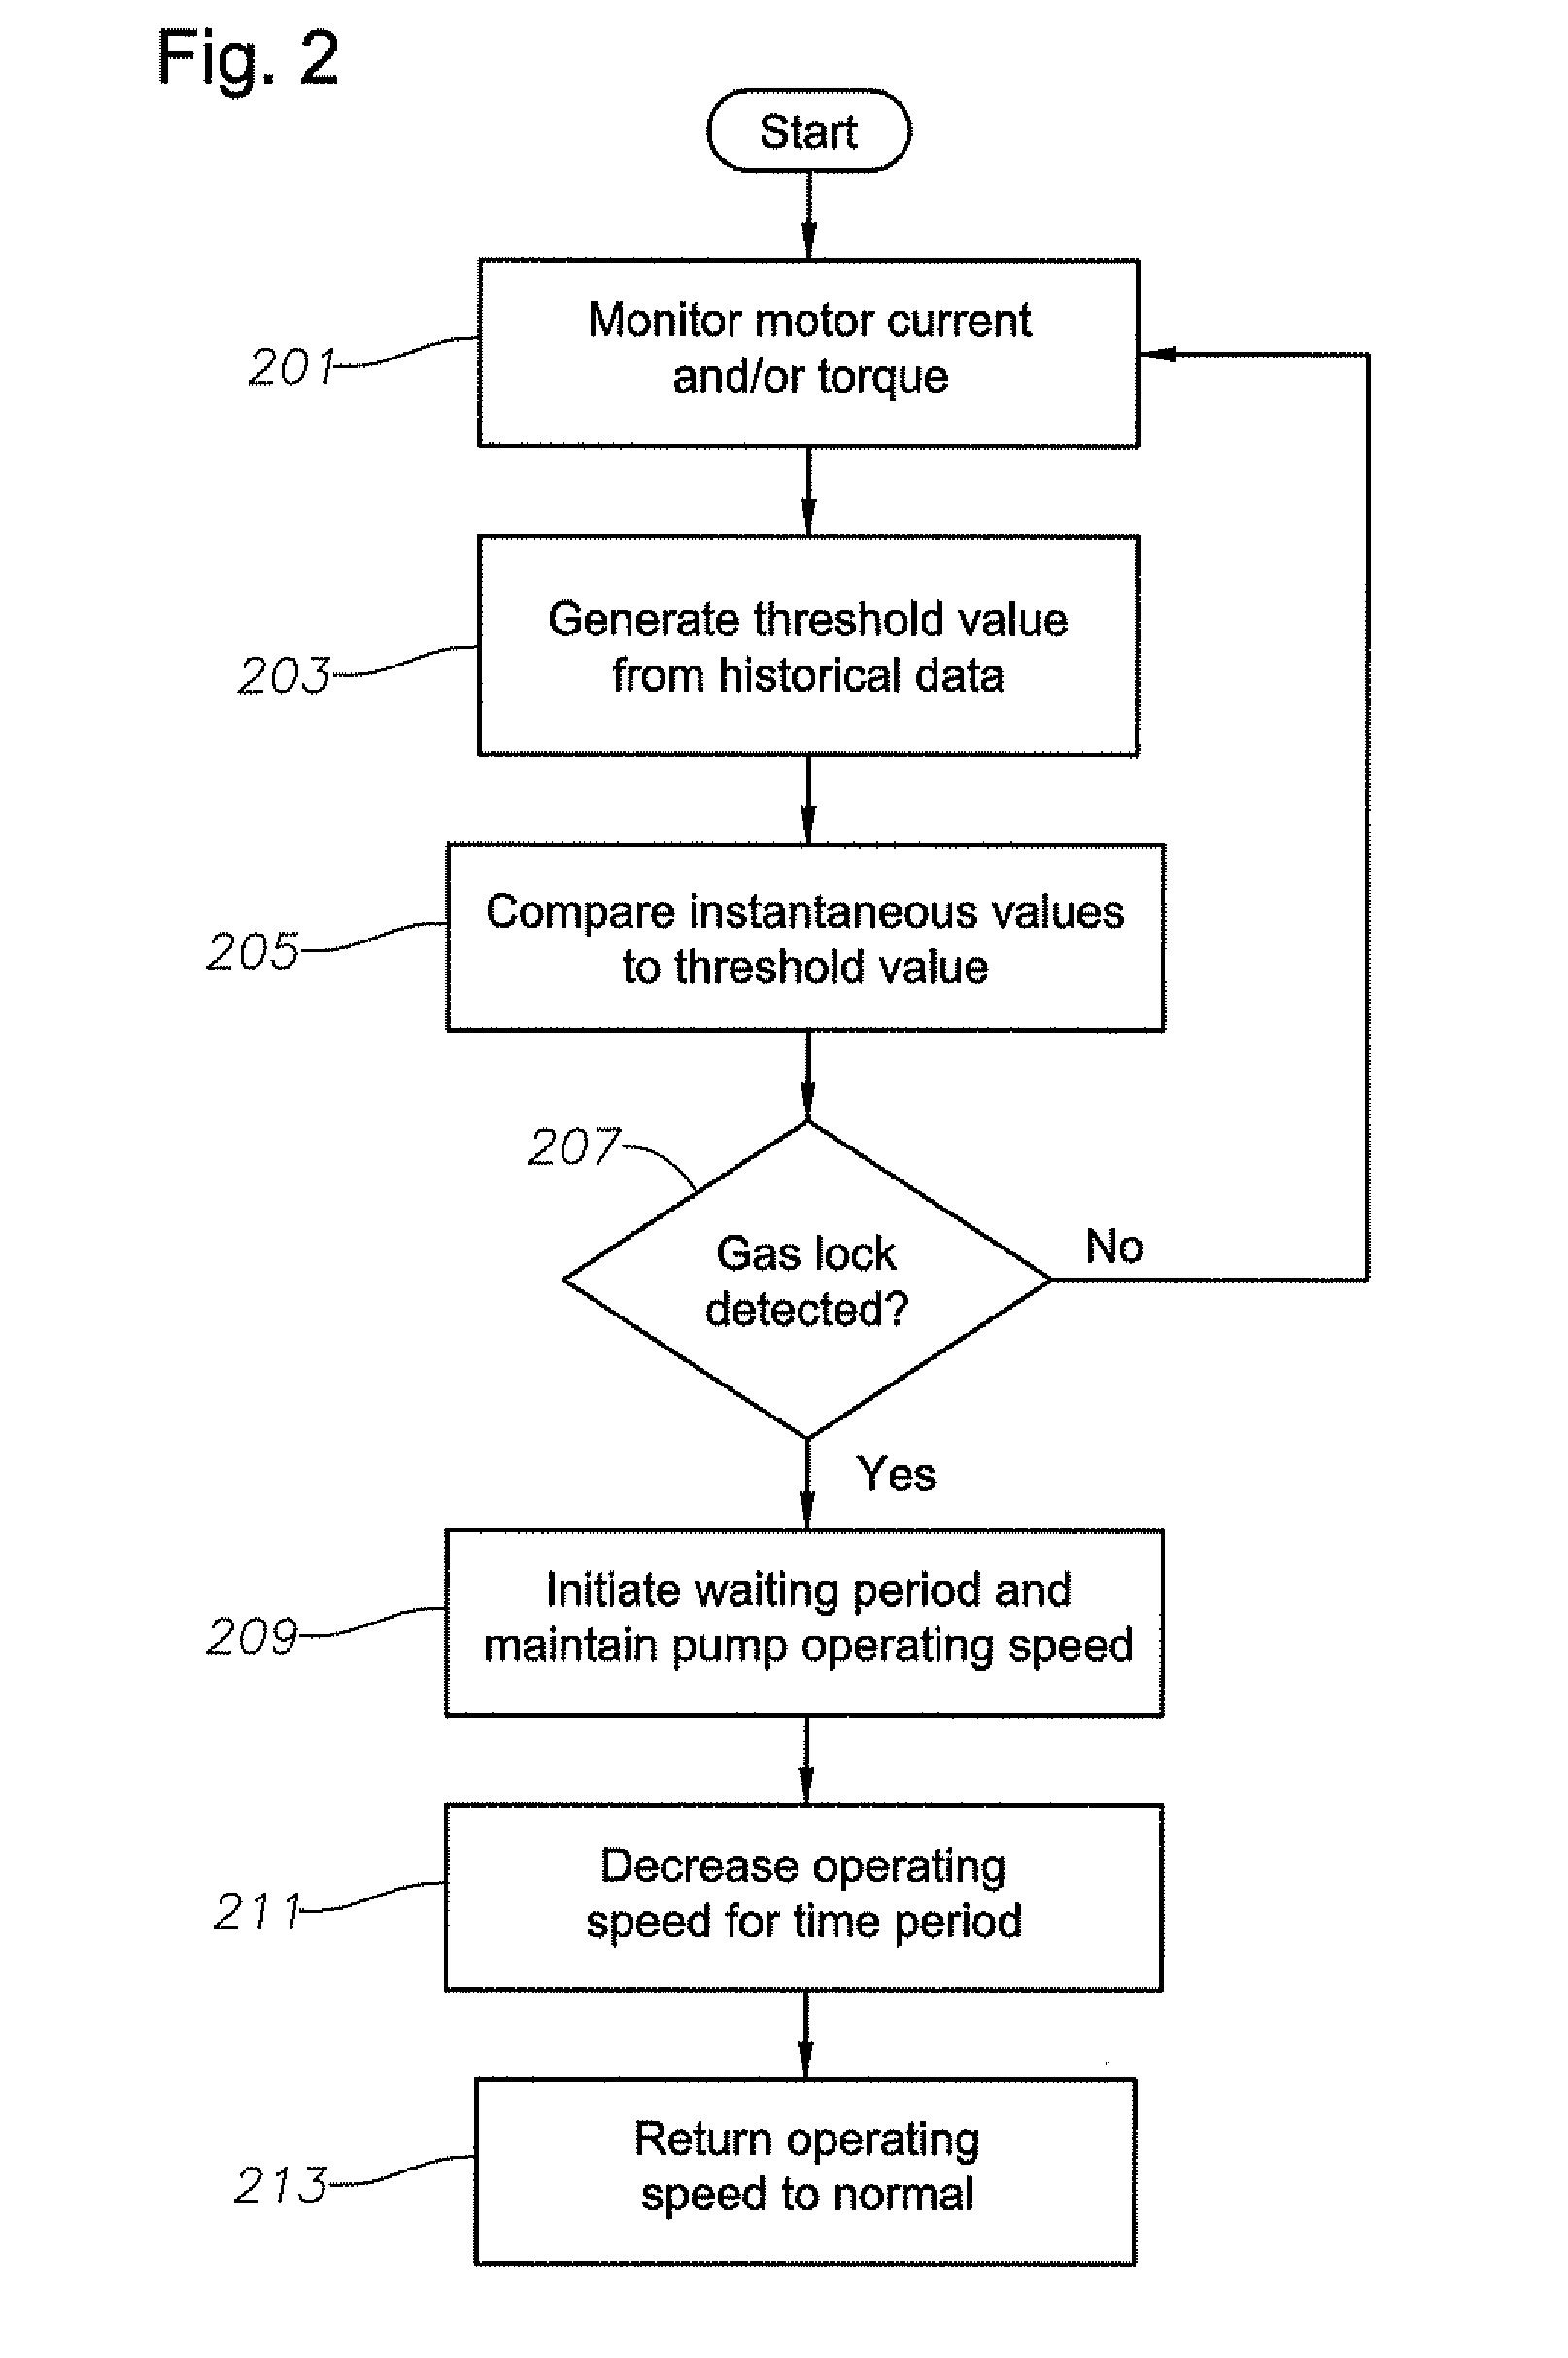 Device, Method And Program Product To Automatically Detect And Break Gas Locks In An ESP